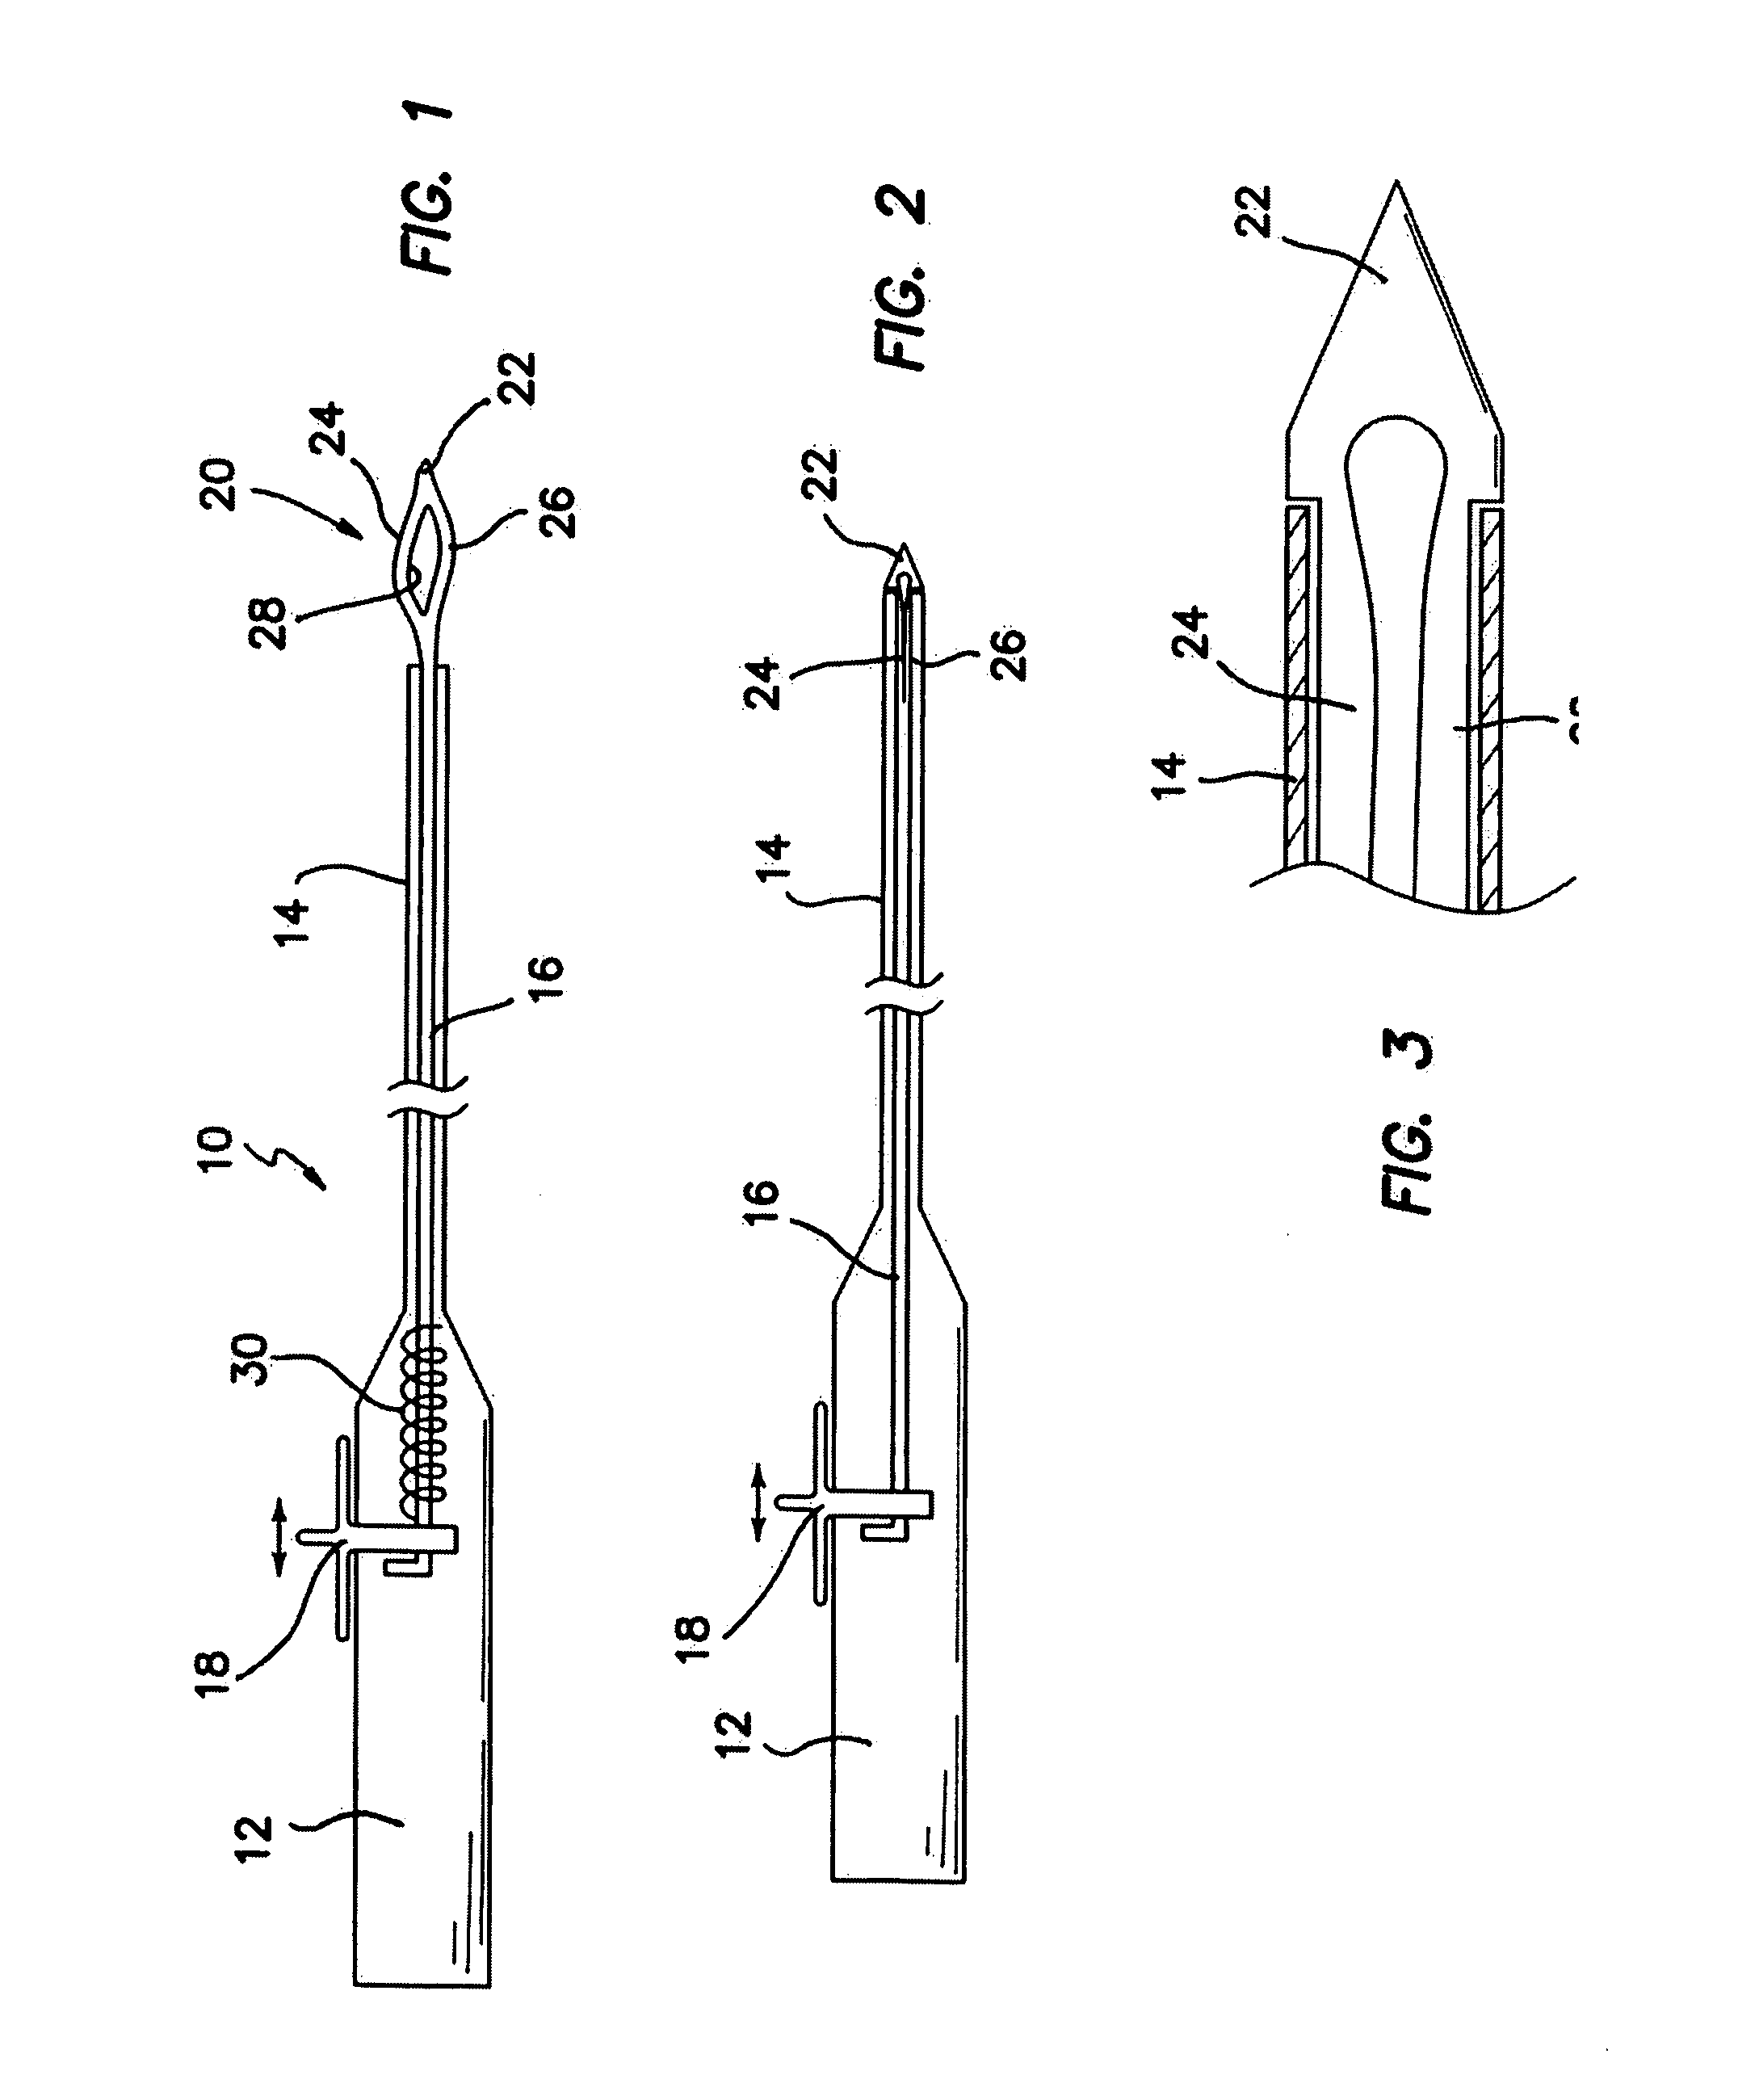 Expandable needle suture apparatus and associated handle assembly with rotational suture manipulation system